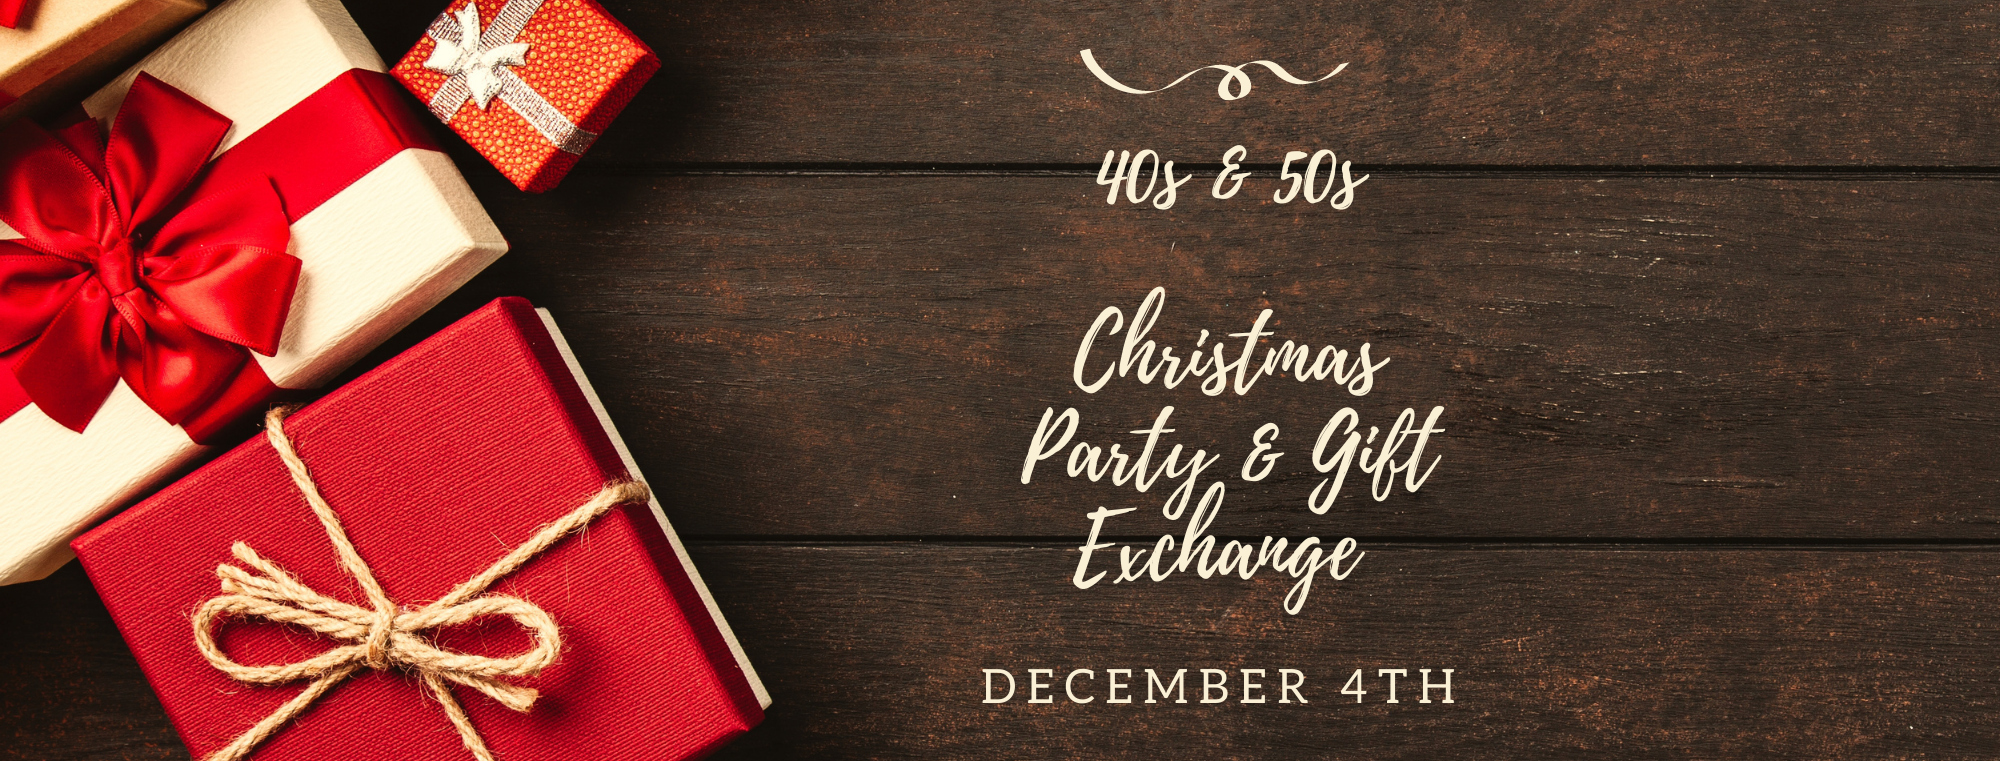 40's and 50's Christmas Party